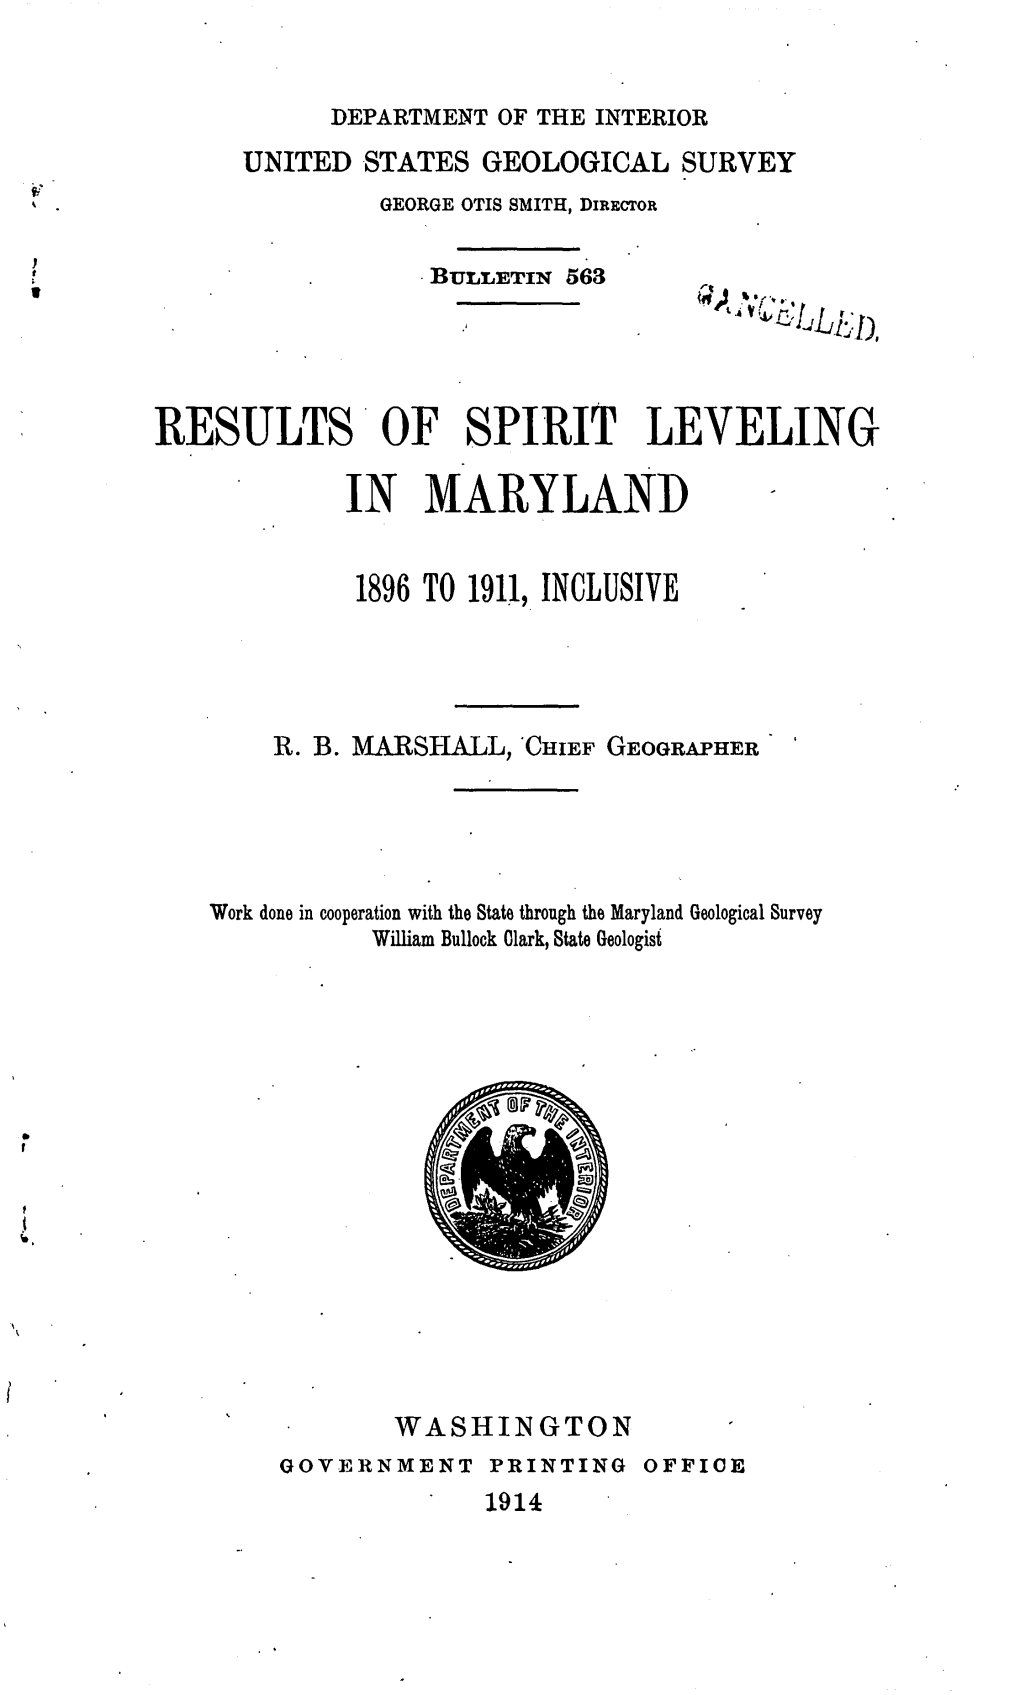 Results of Spirit Leveling in Maryland 1896 to 1911, Inclusive